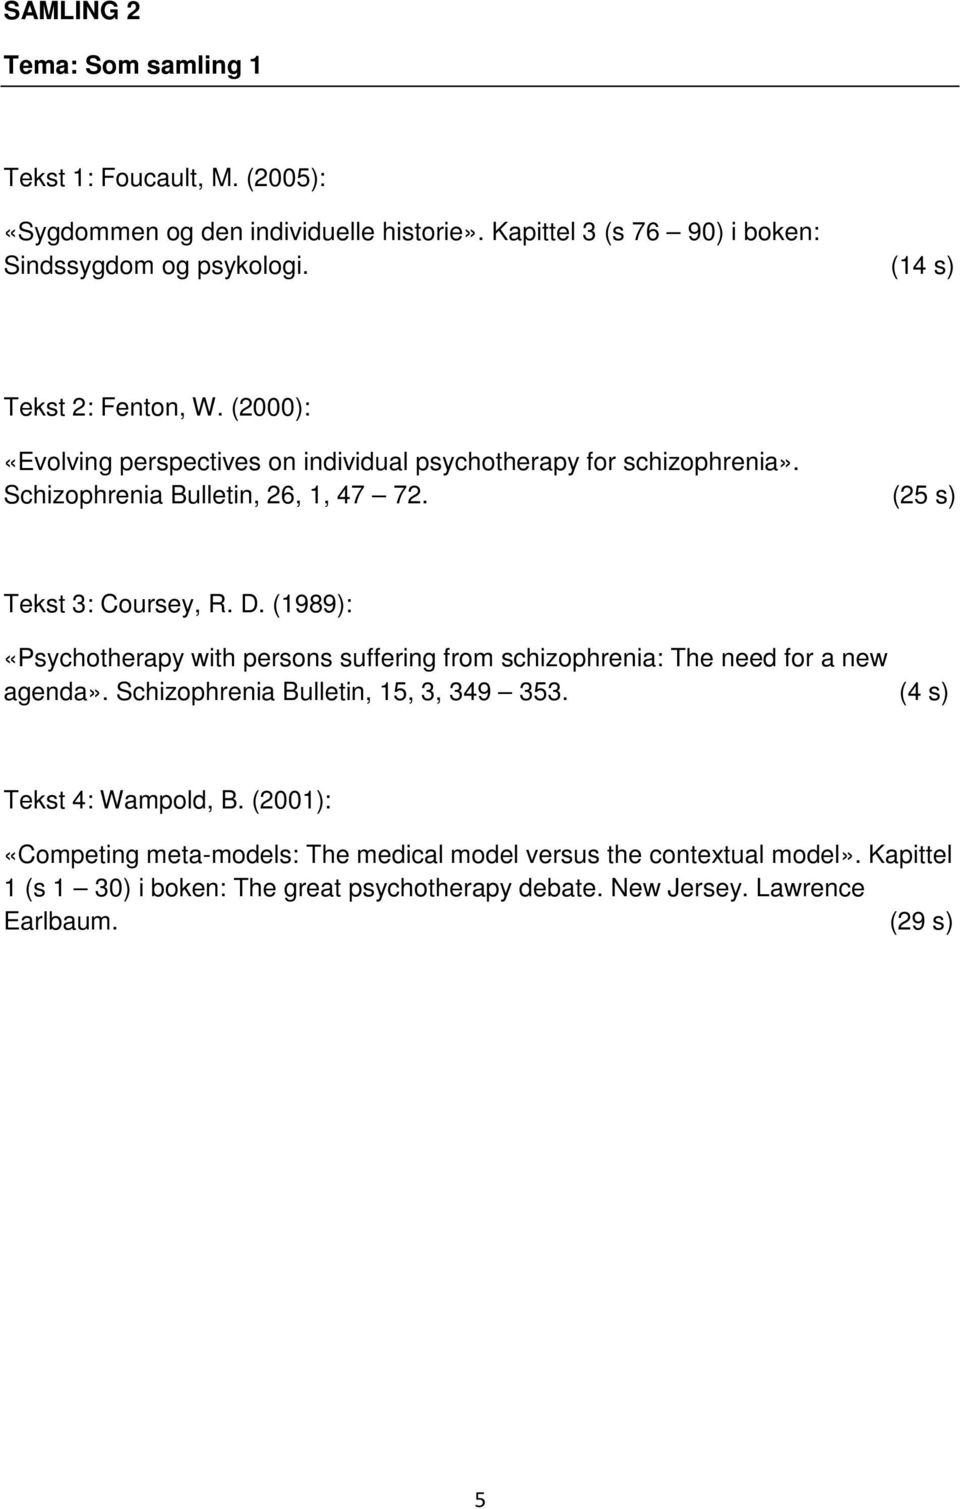 (25 s) Tekst 3: Coursey, R. D. (1989): «Psychotherapy with persons suffering from schizophrenia: The need for a new agenda». Schizophrenia Bulletin, 15, 3, 349 353.